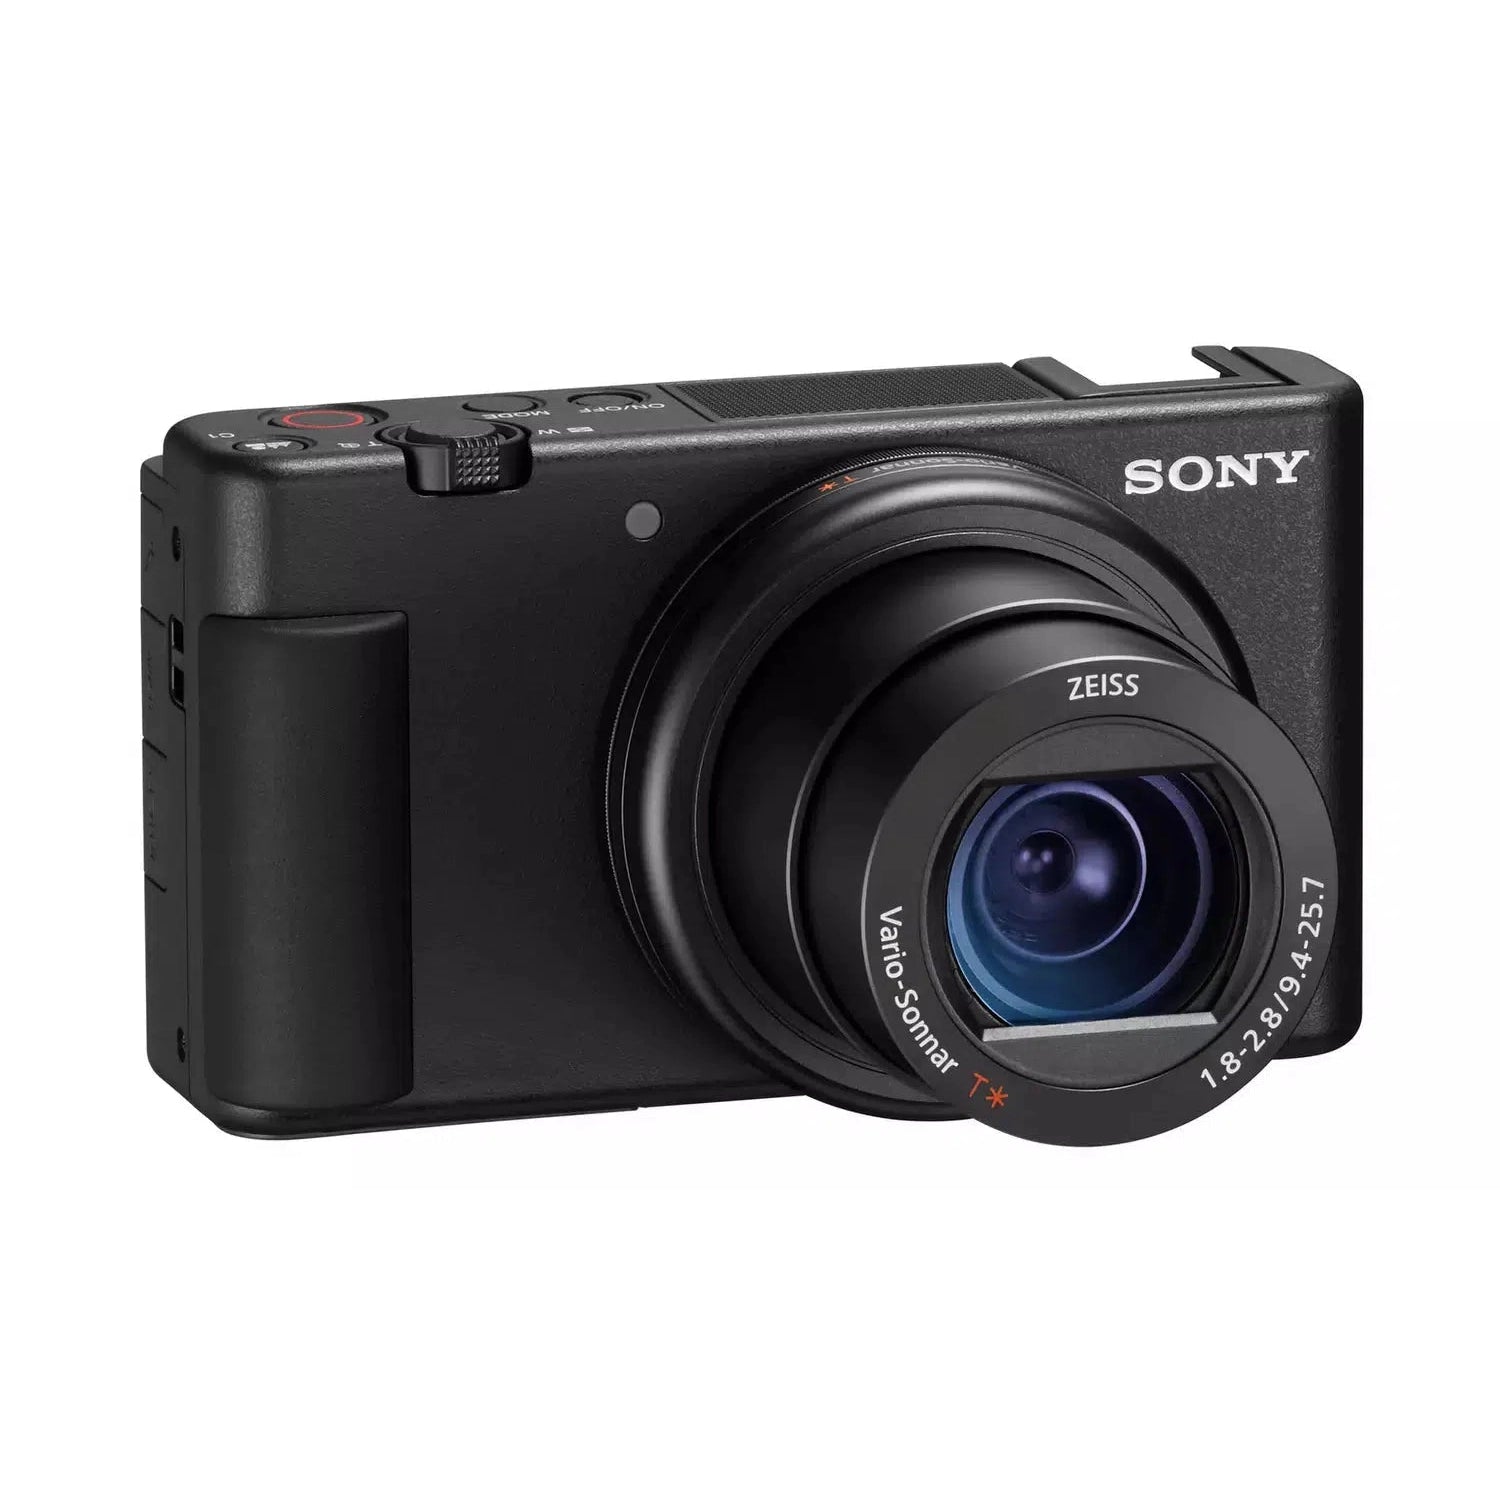 Sony ZV-1 Compact Vlogging Camera with 24-70mm Lens - Black - Good - No Charger